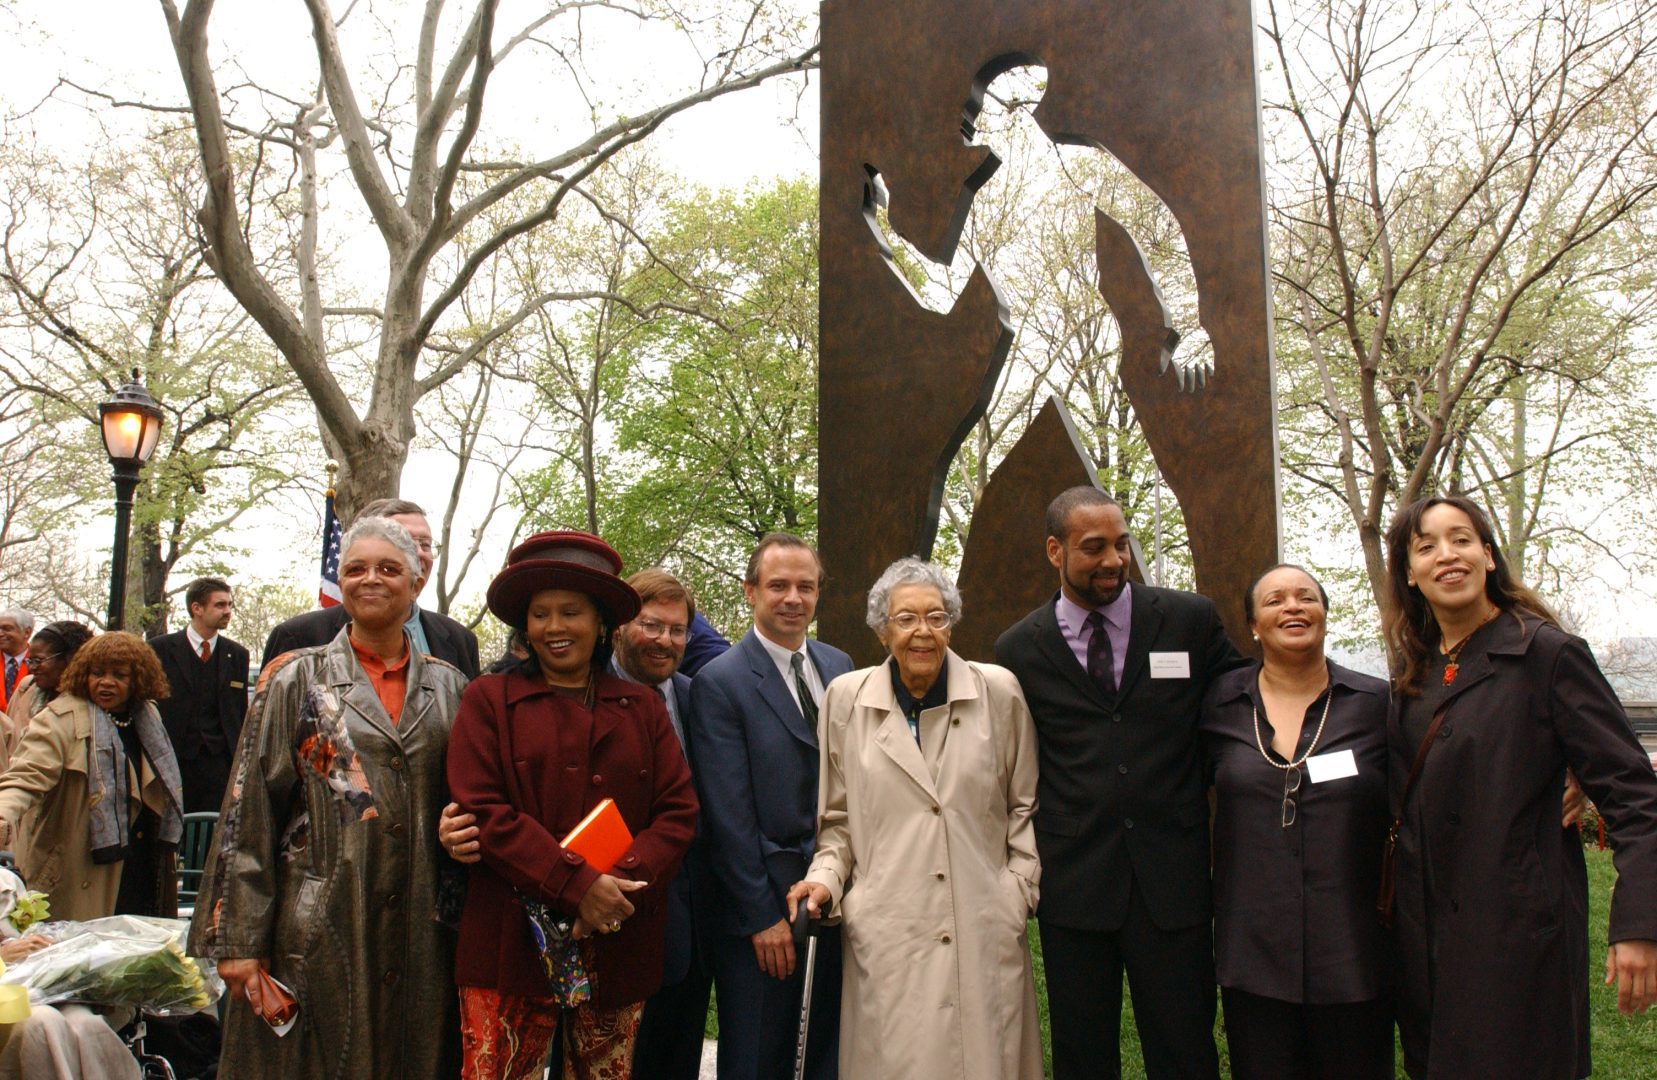 The Ralph Ellison Committee, elected officials, artist Elizabeth Catlett, and the public gather at the Ralph Ellison Memorial